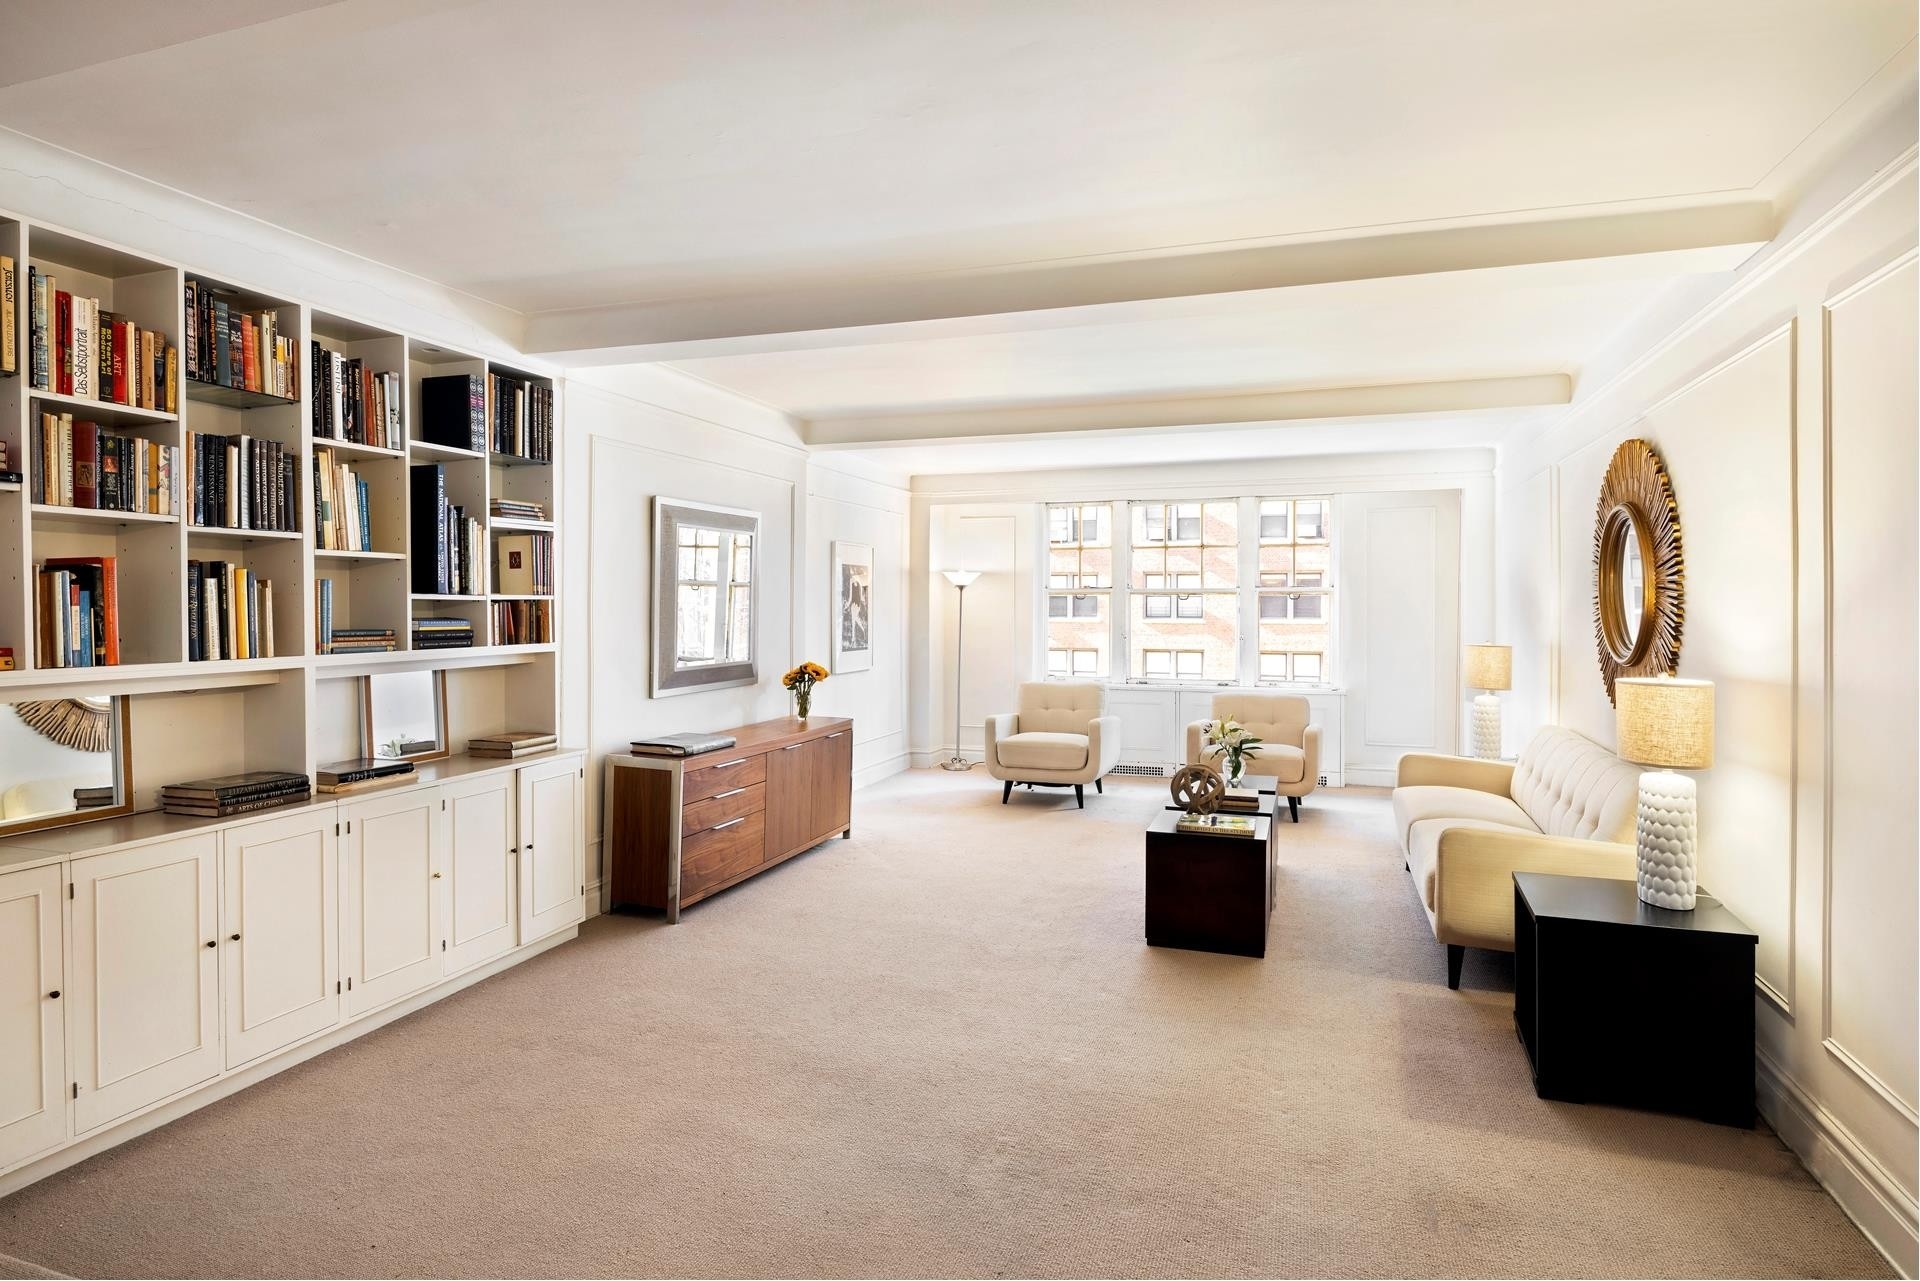 Co-op Properties for Sale at 450 W END AVE, 6C Upper West Side, New York, New York 10024